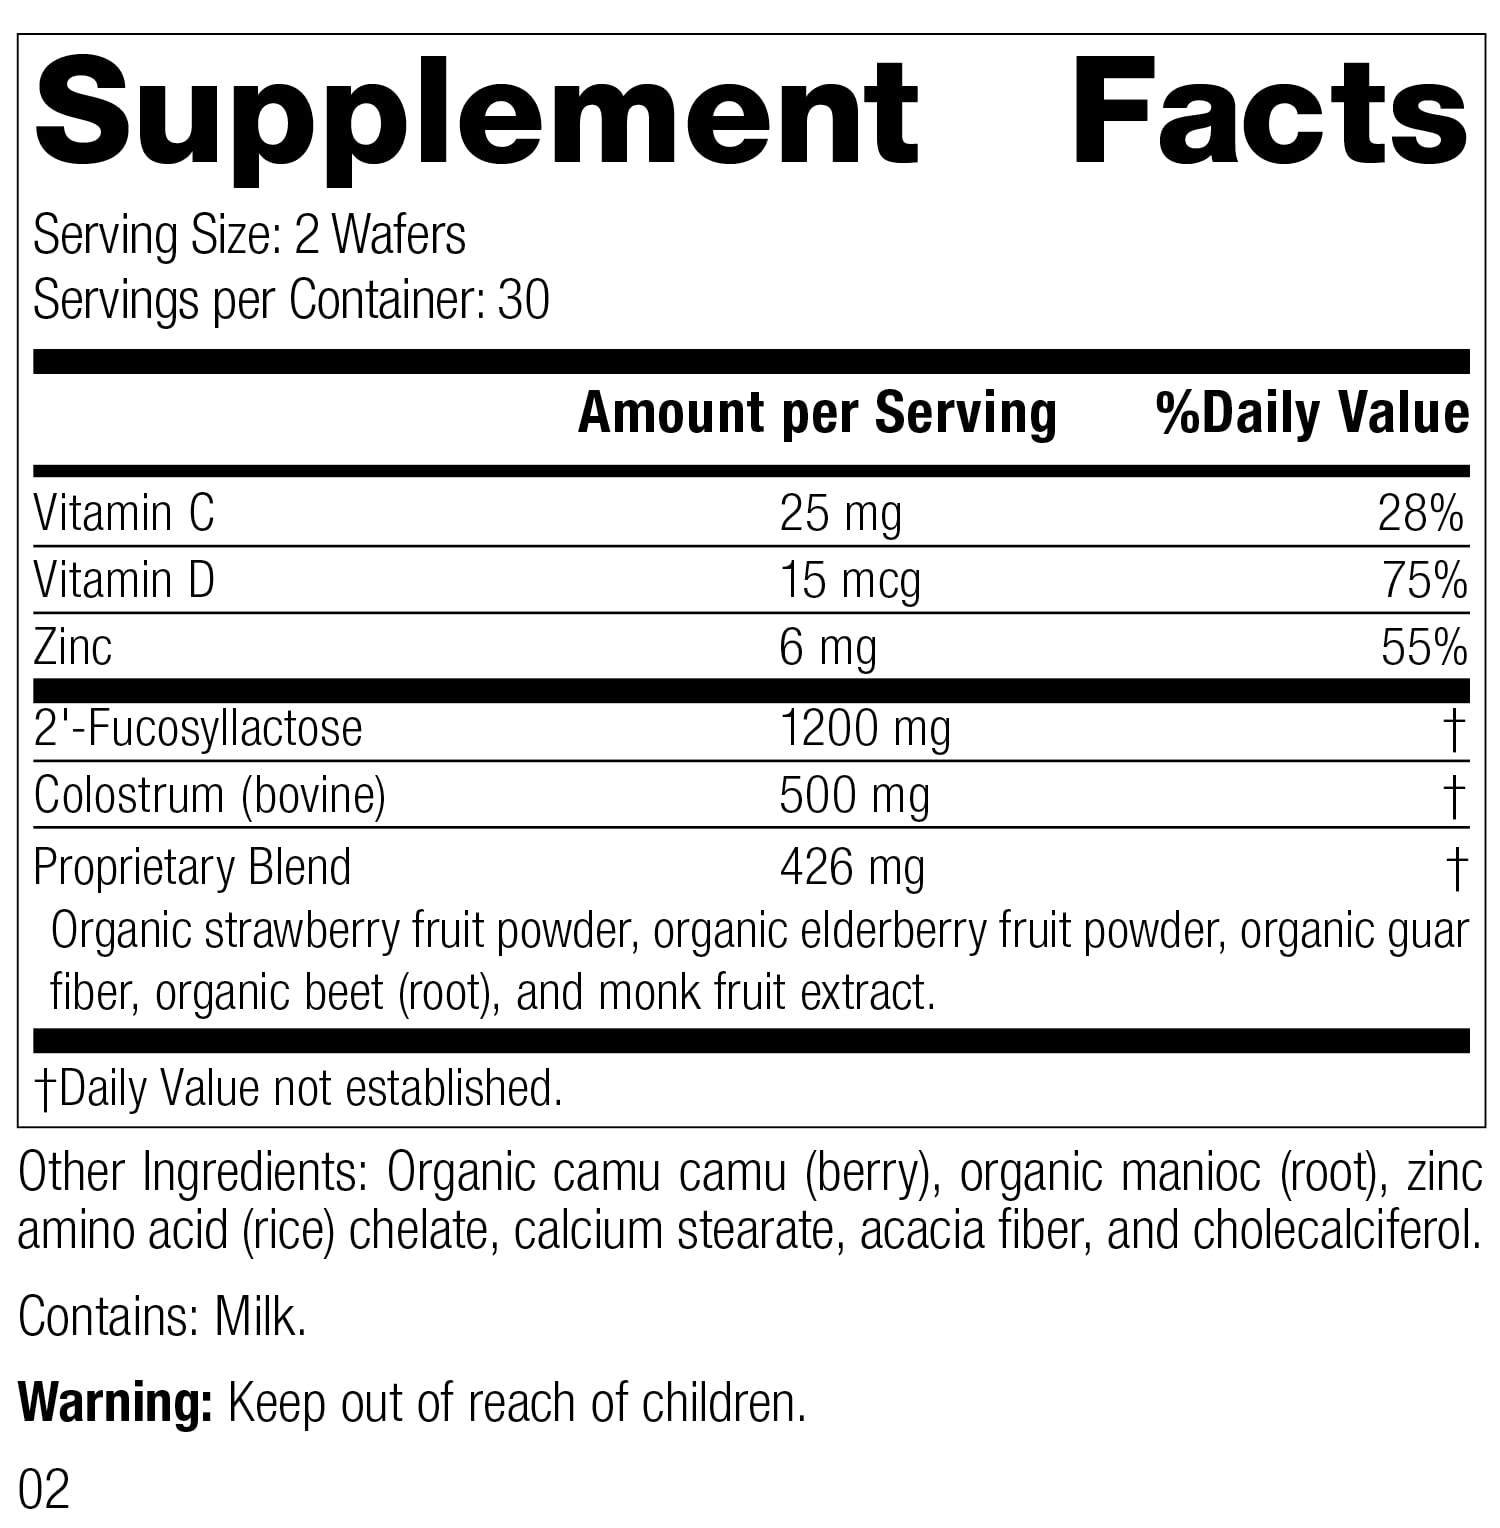 Standard Process - Children's Immune - Everyday Support with Elderberry - 60 Wafers